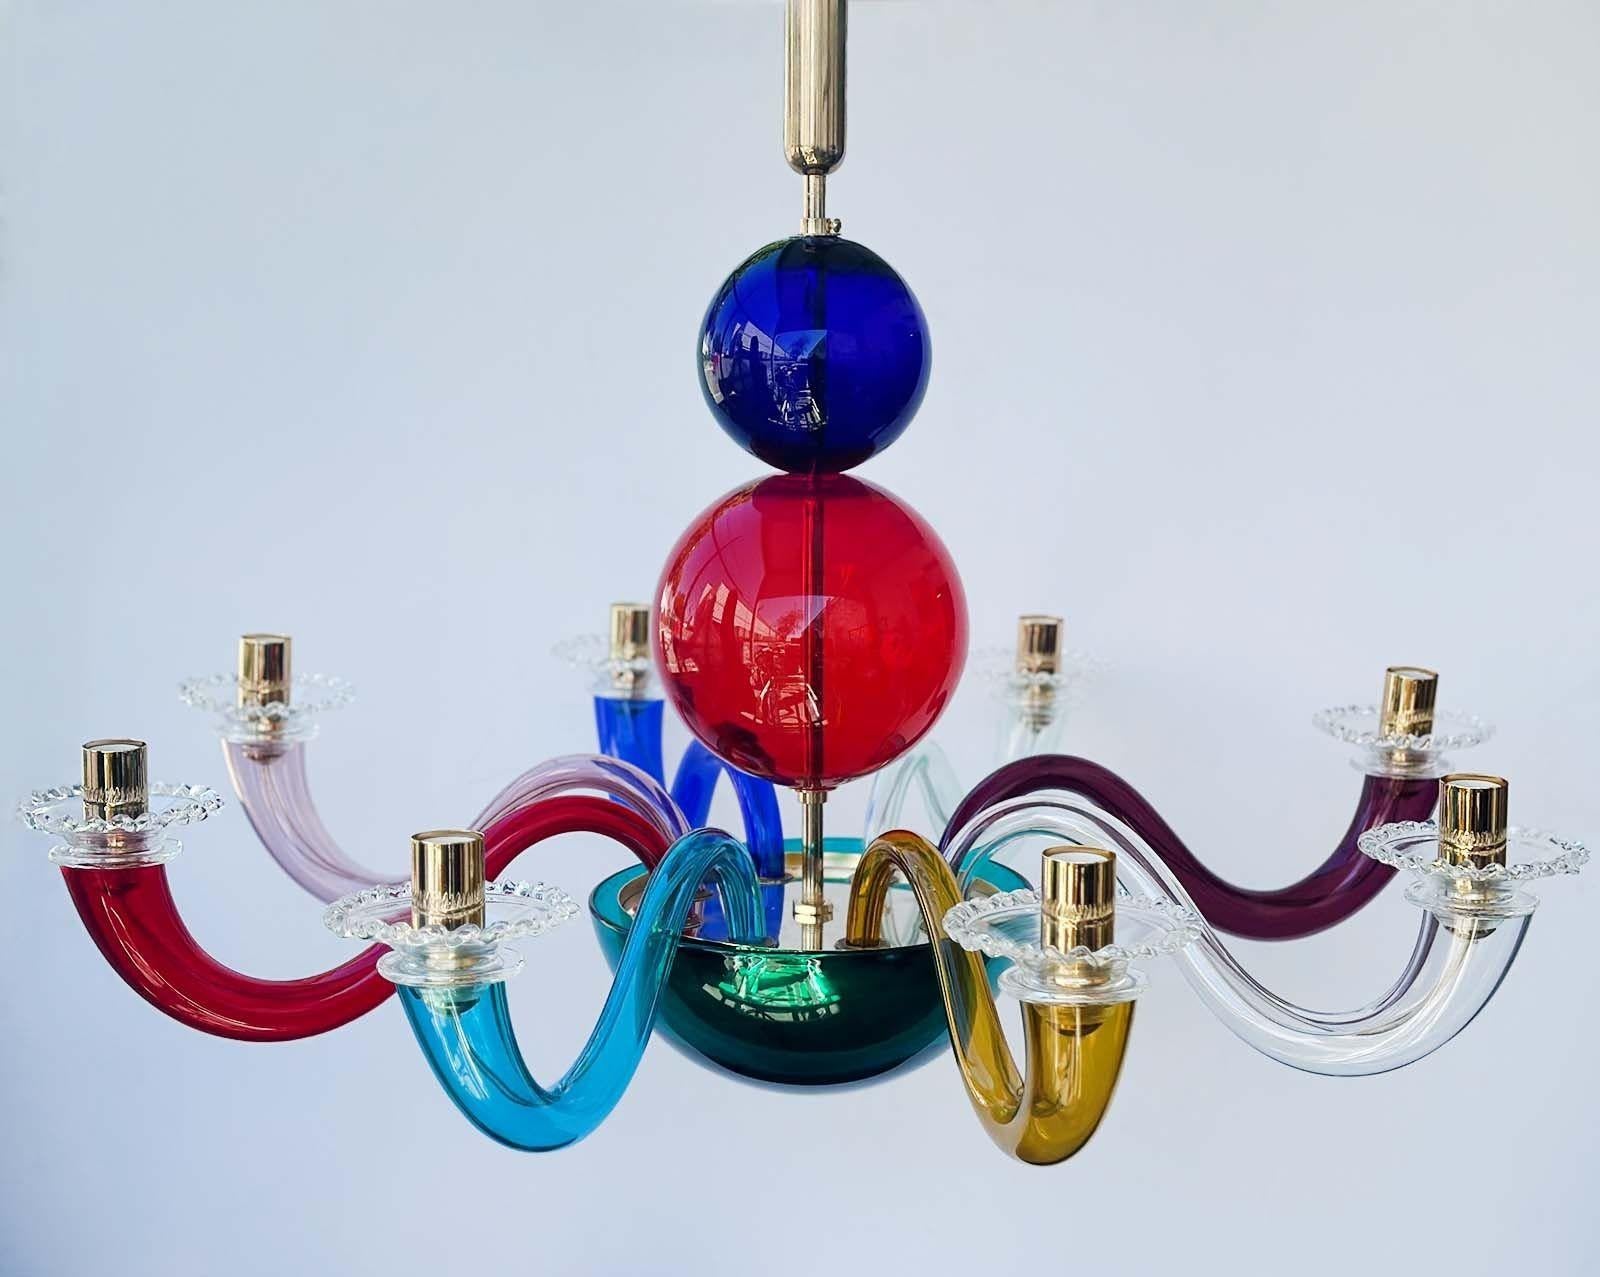 Vintage Italian Murano glass and brass chandelier designed in 1946 by Gio Ponti and manufactured by Venini, consisting of a center semicircle globe and two center colorful glass balls, along with eight arm lights. Each arm of the chandelier features